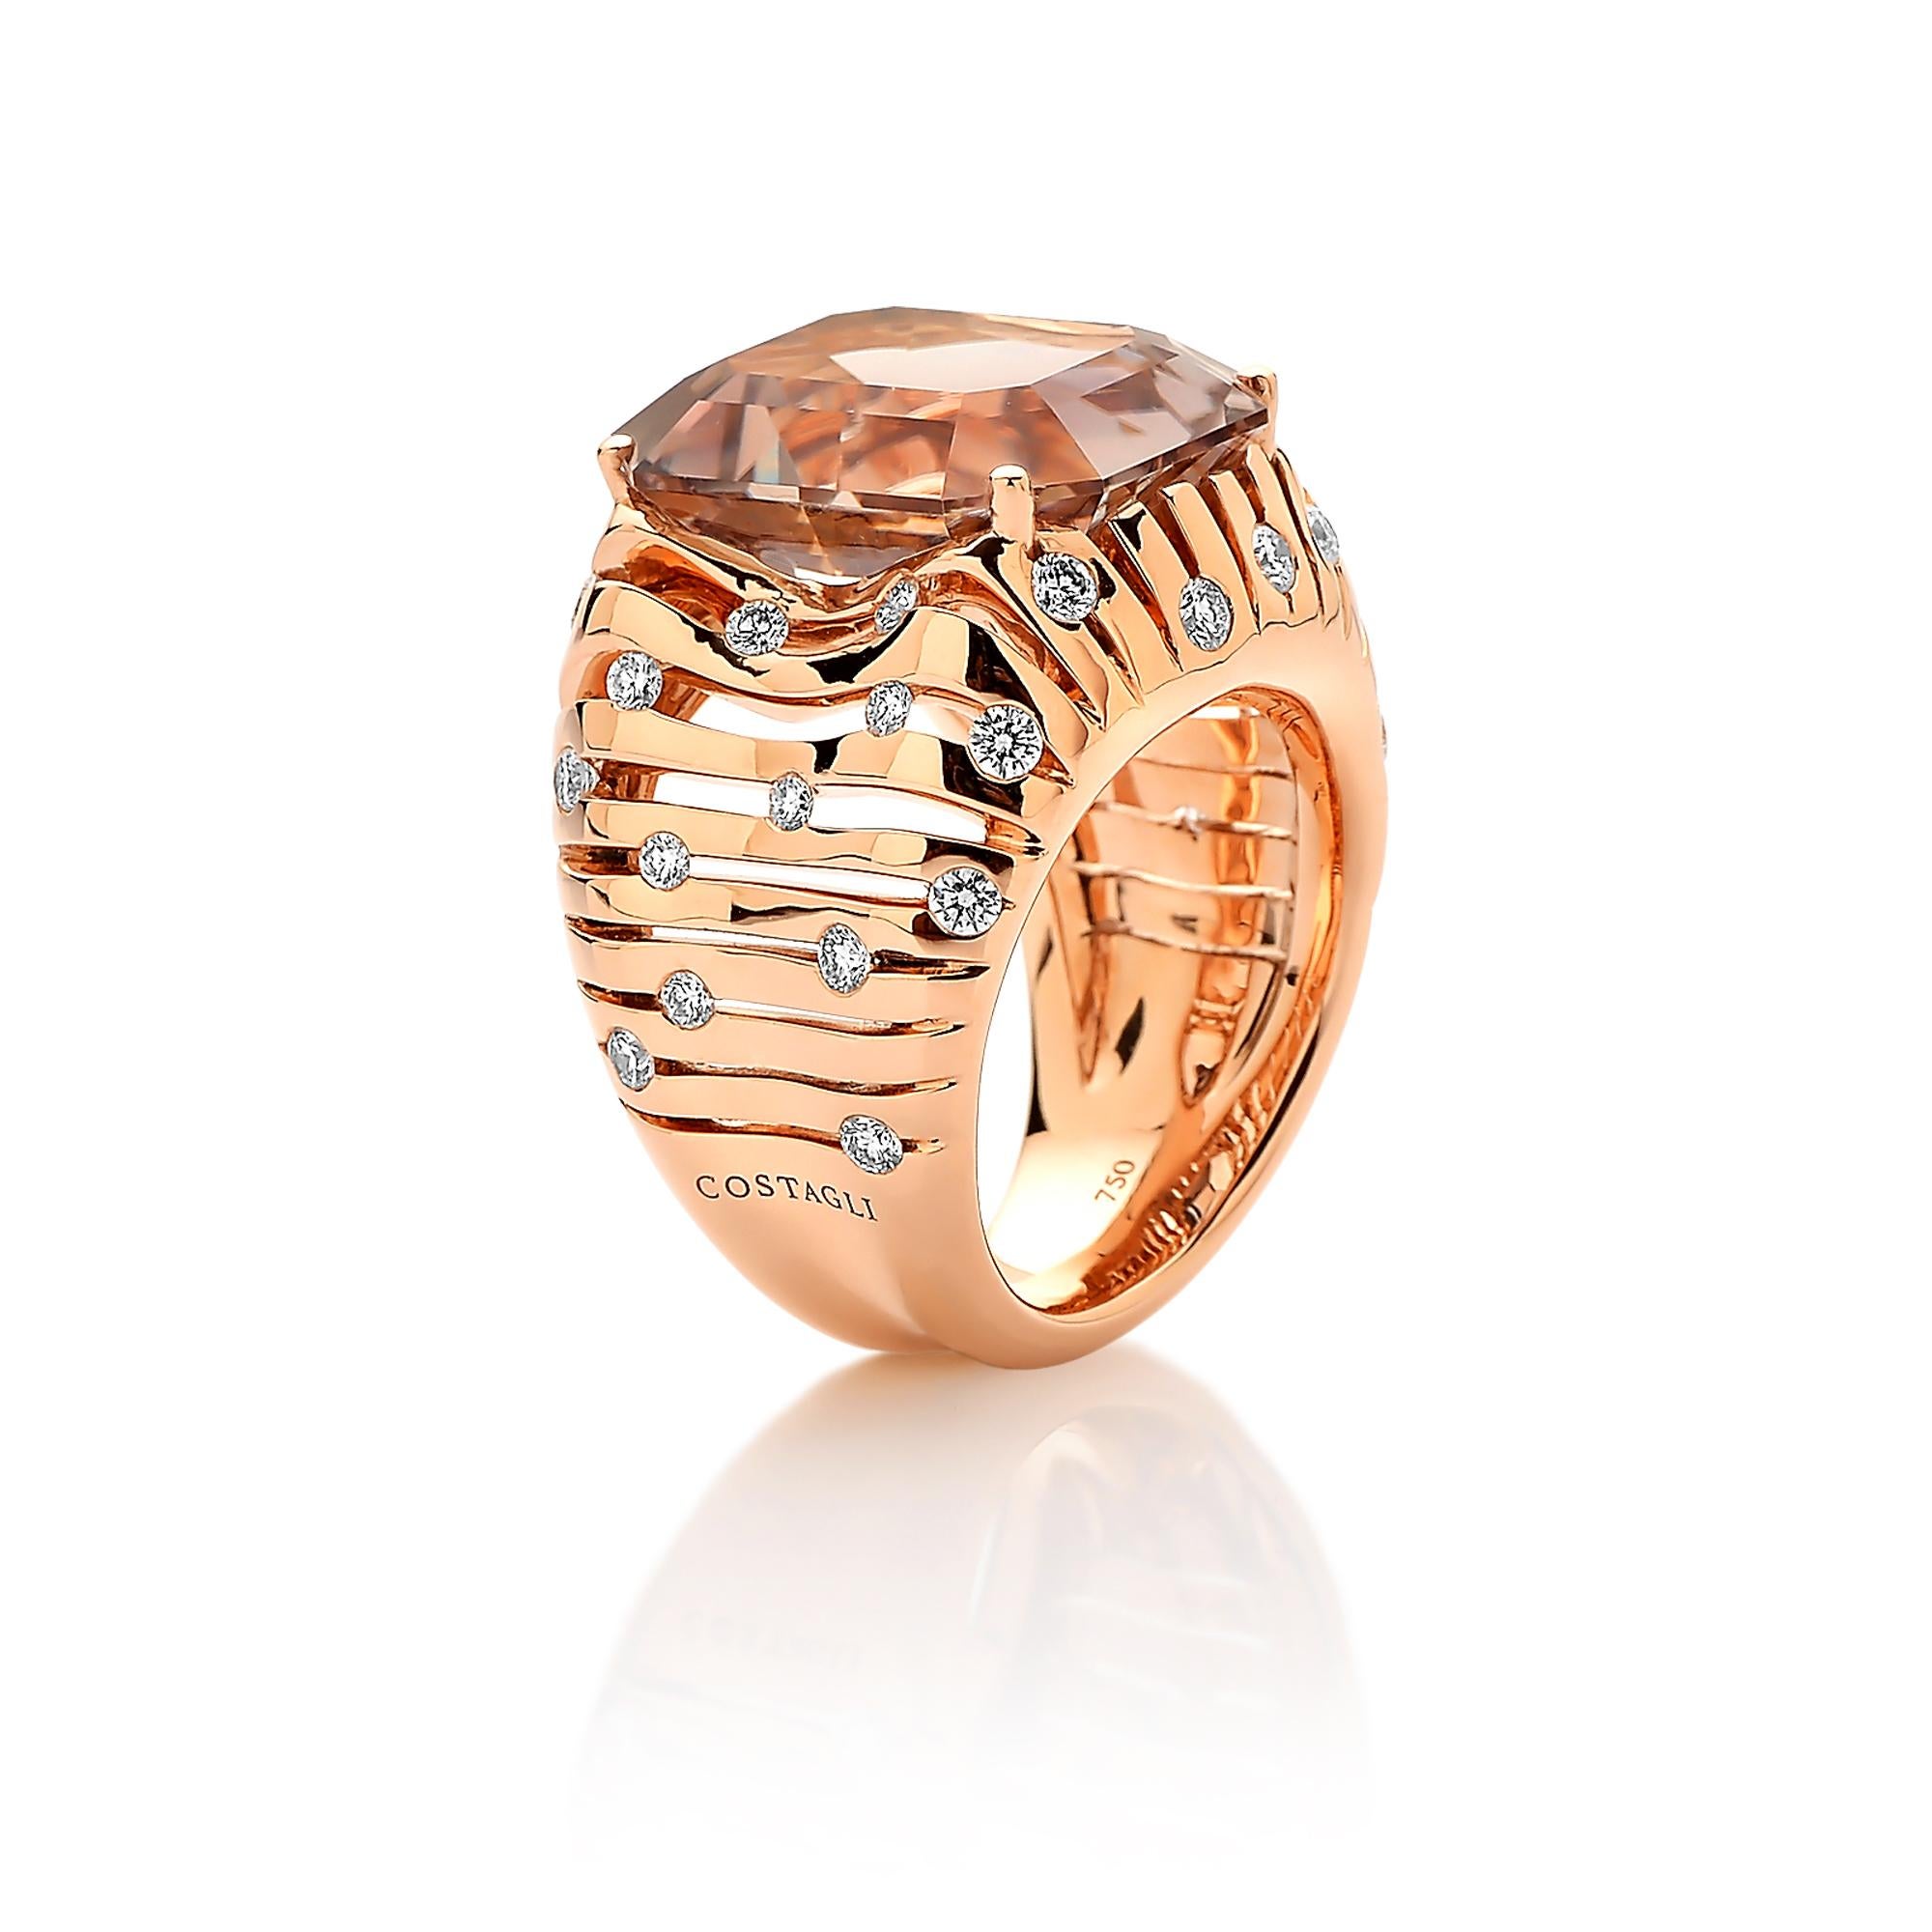 From the Flutti collection, emerald-cut prosecco tourmaline ring with round, brilliant diamond details set in 18 karat rose gold. 

Warm rose gold color paired with 